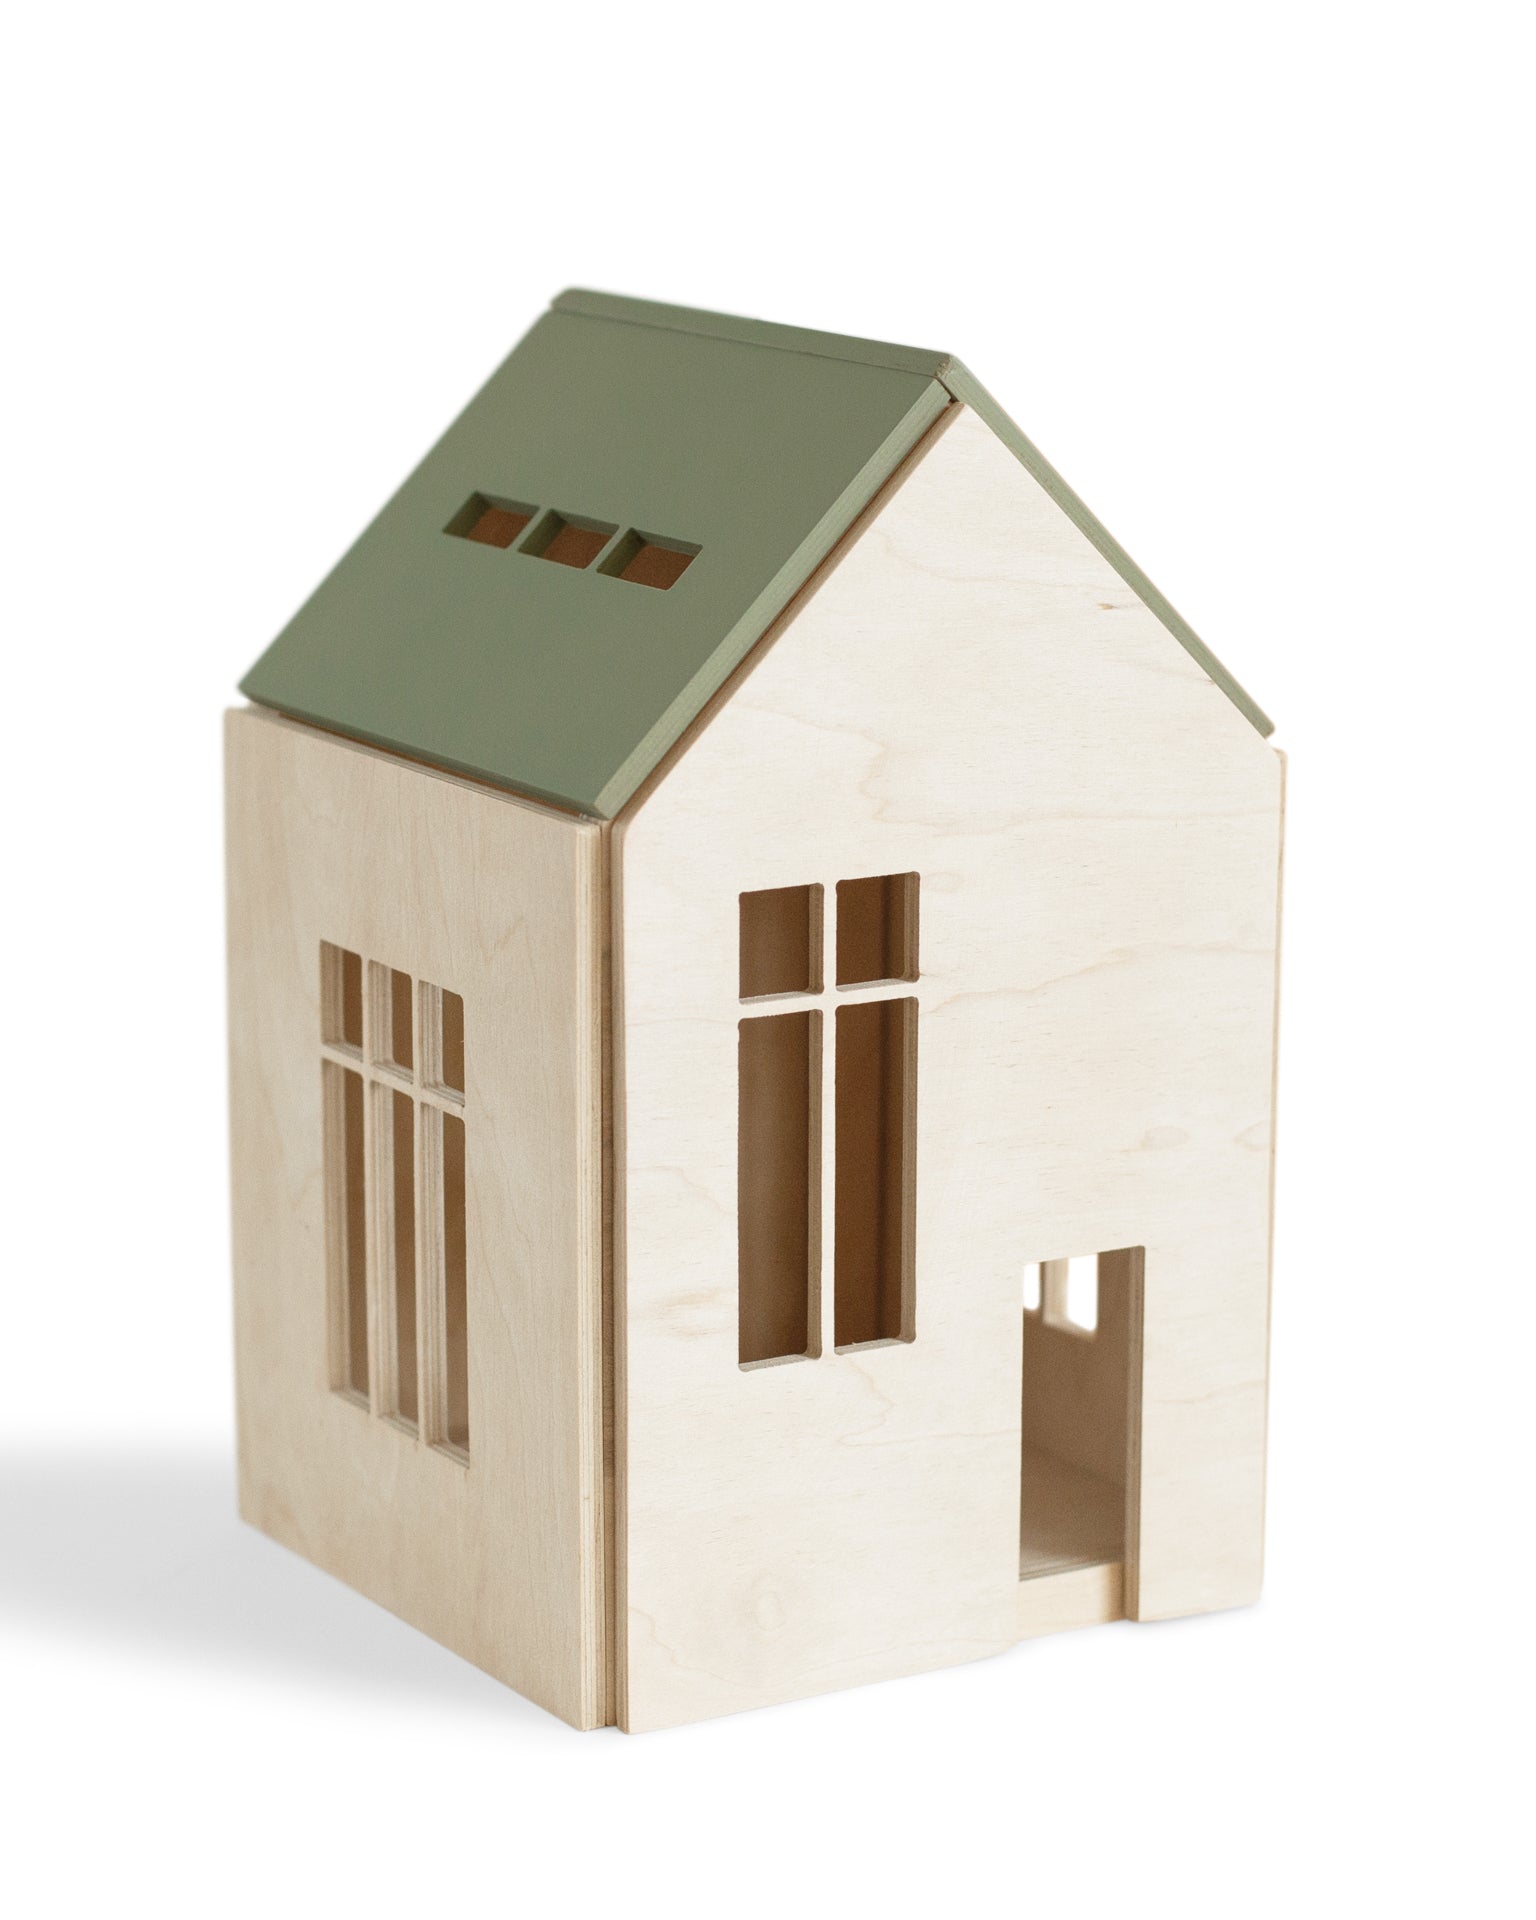 Little babai play large magnetic dollhouse in khaki